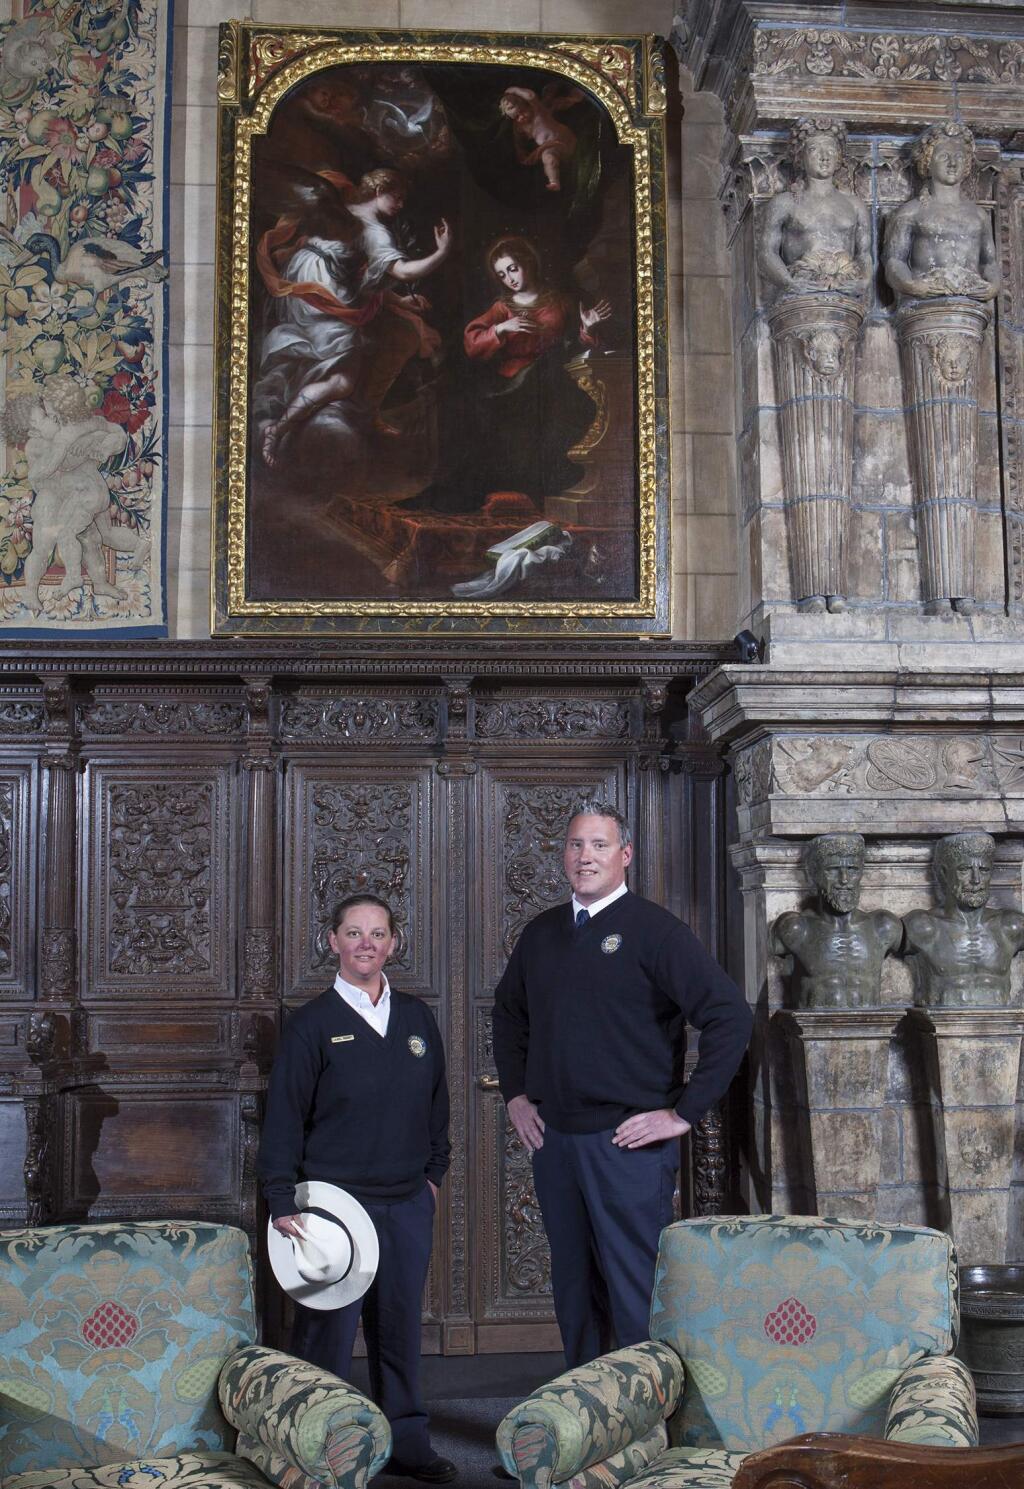 In this undated photo provided by Hearst Castle/California State Parks are guides Laurel Rodger and Carson Cargill posing below the 'Annunciation' painting hanging at Hearst Castle in San Simeon, Calif. The painting, that has been hanging at California's landmark Hearst Castle for decades, has been identified as a 17th century work thanks to two guides who noticed a previously undetected monogram and inscription when it was illuminated by late afternoon sunlight last fall. (Victoria Garagliano/Hearst Castle/California State Parks via AP)